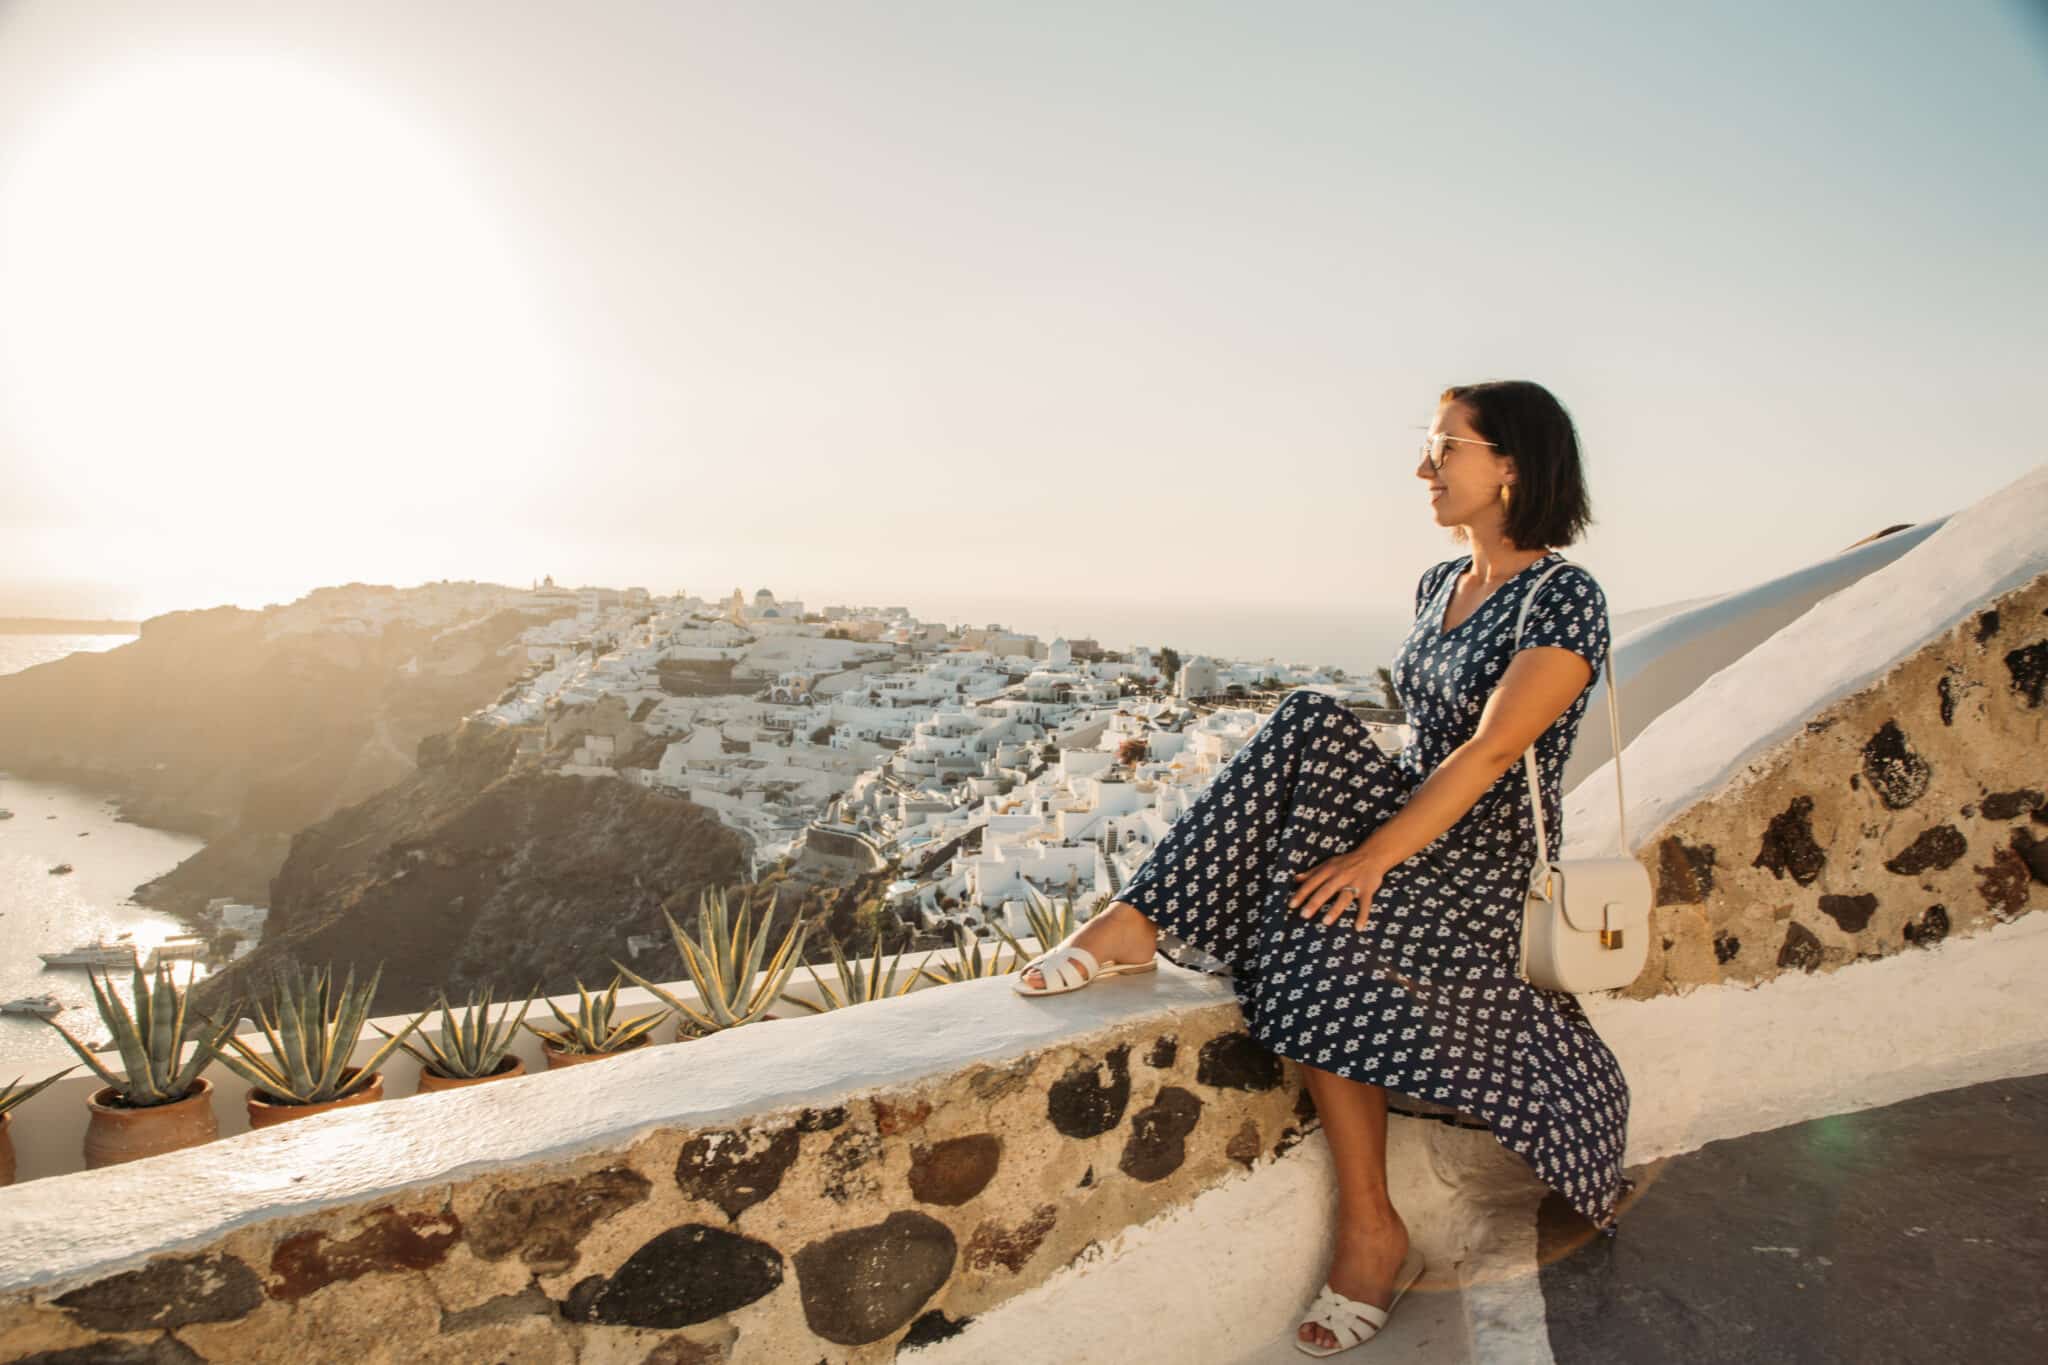 Lindsey wearing a navy Karina Midi dress with short sleeves, sitting on a ledge overlooking the white homes of Oia, Santorini, Greece